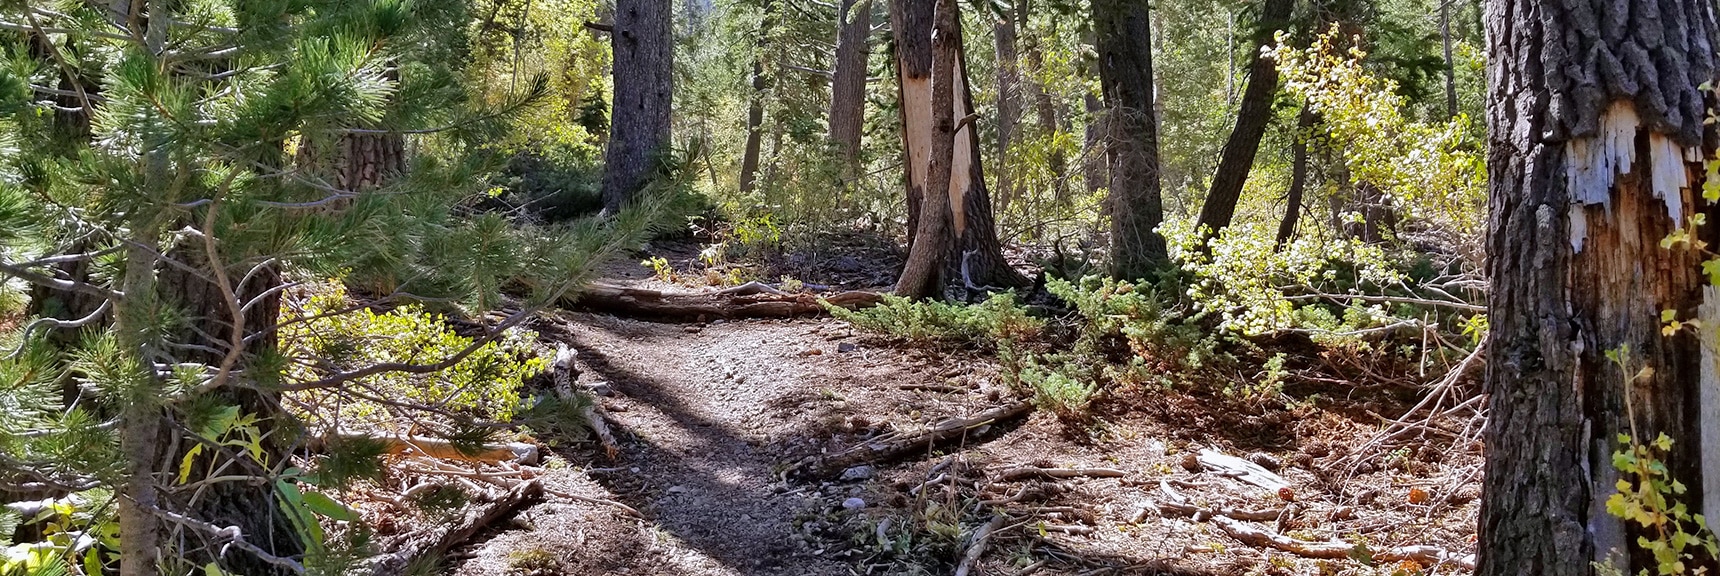 Descending Into the Lower Cougar Ridge Trail Forest | Mummy Springs Loop | Mt. Charleston Wilderness | Spring Mountains, Nevada